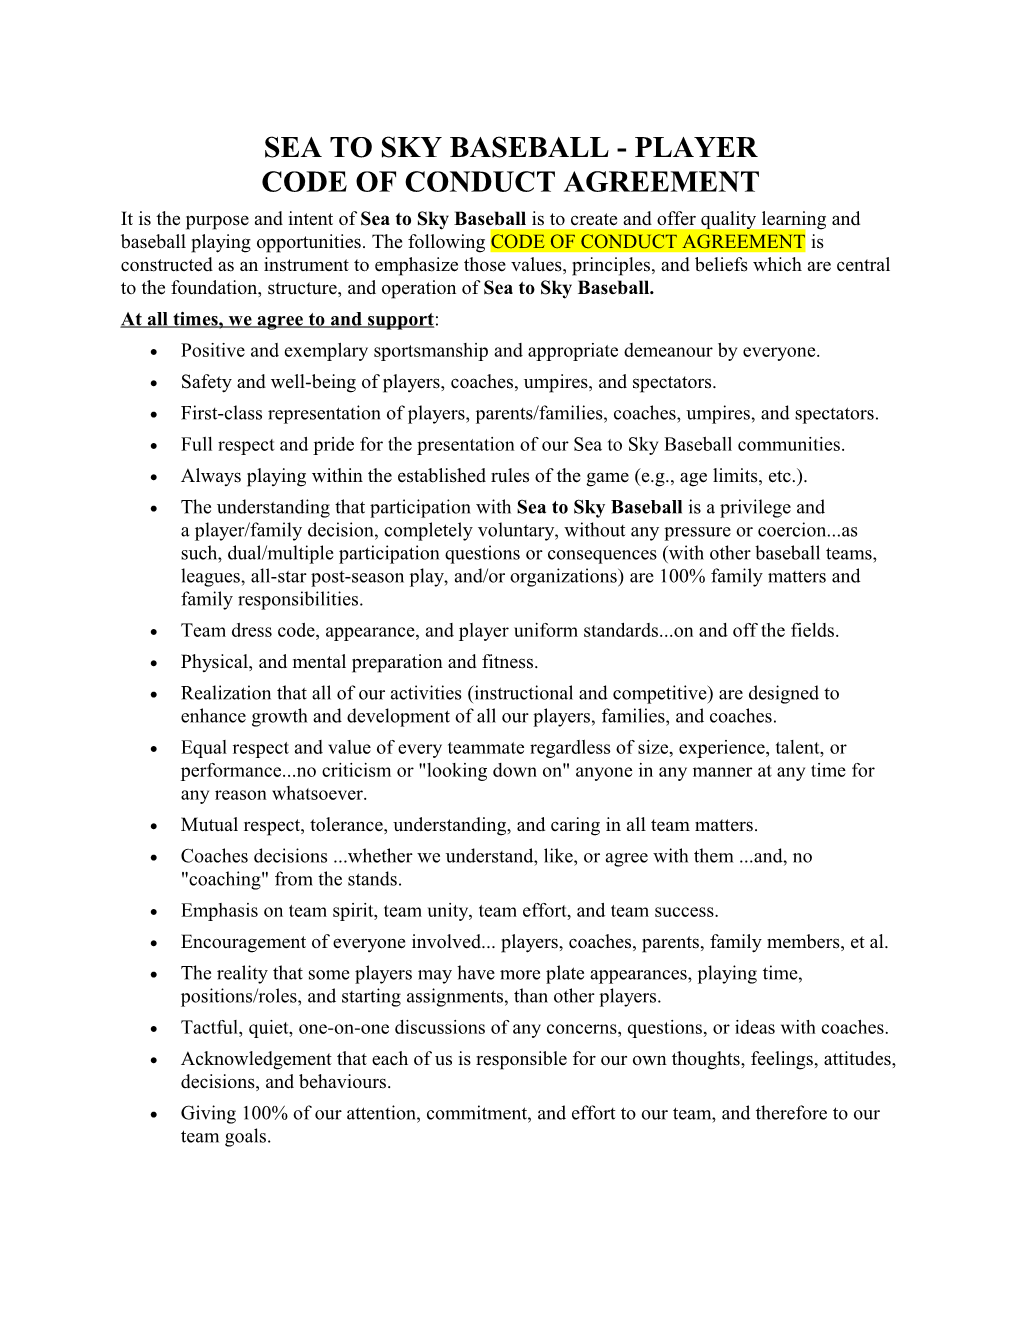 Sea to Sky Baseball - Player Code of Conduct Agreement